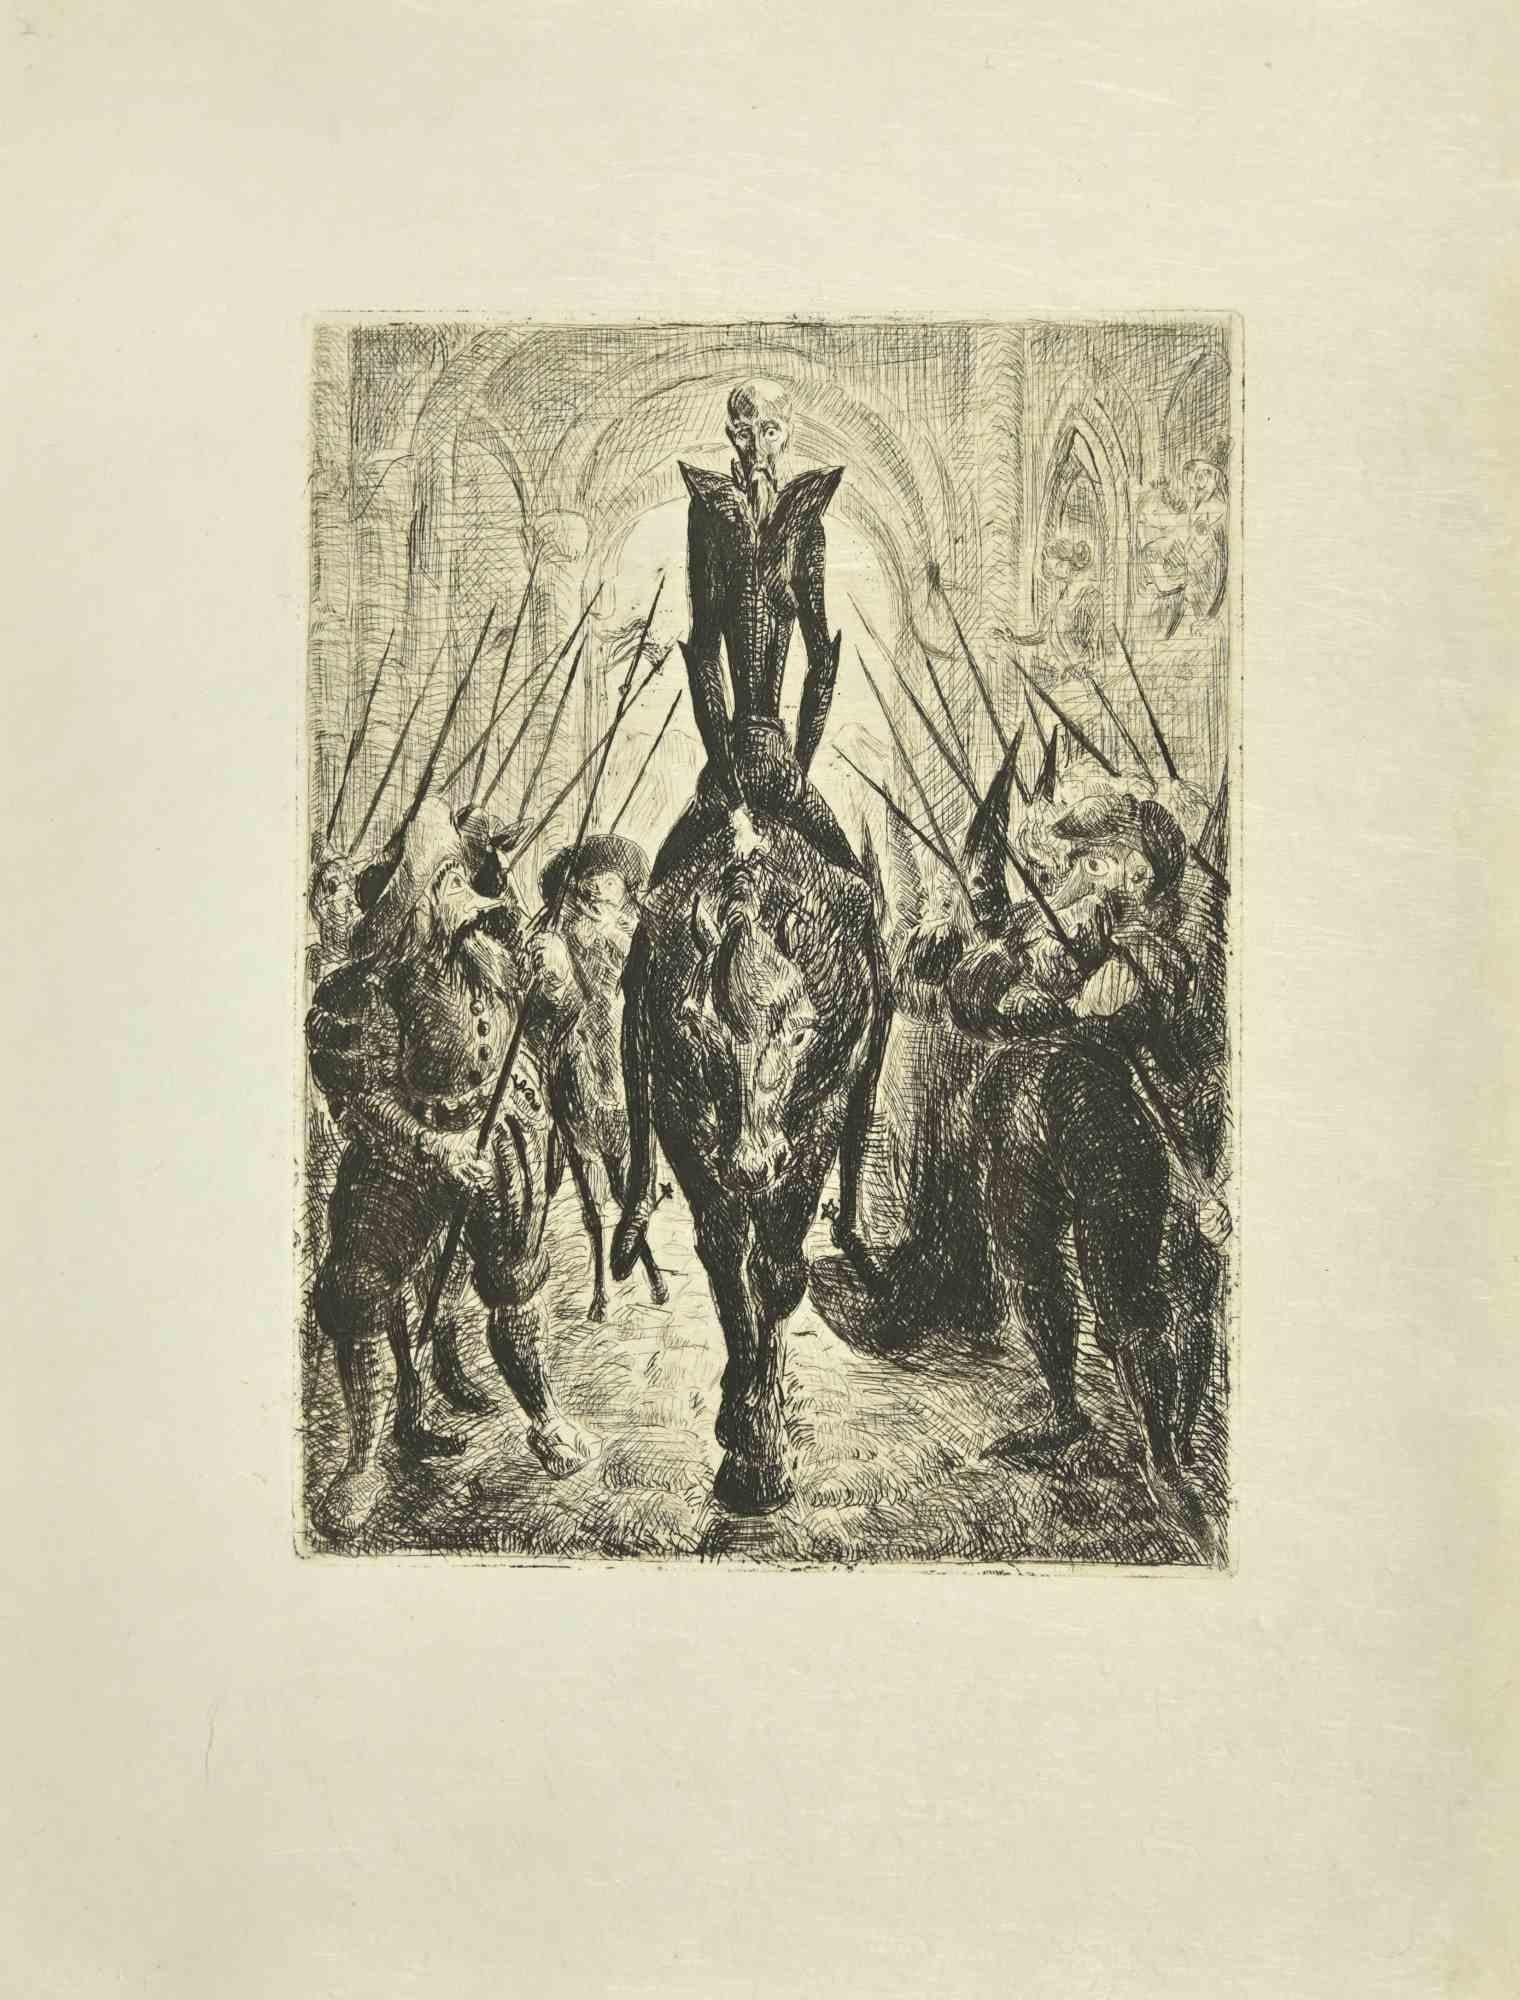 The Arrival of Don Quixote is an etching and drypoint print on ivory-colored Japanese paper, realized by Wladyslaw Jahl in 1951.

It belongs to a limited edition of 125 specimens.

Good conditions.

The artwork represents a visual scene from Don